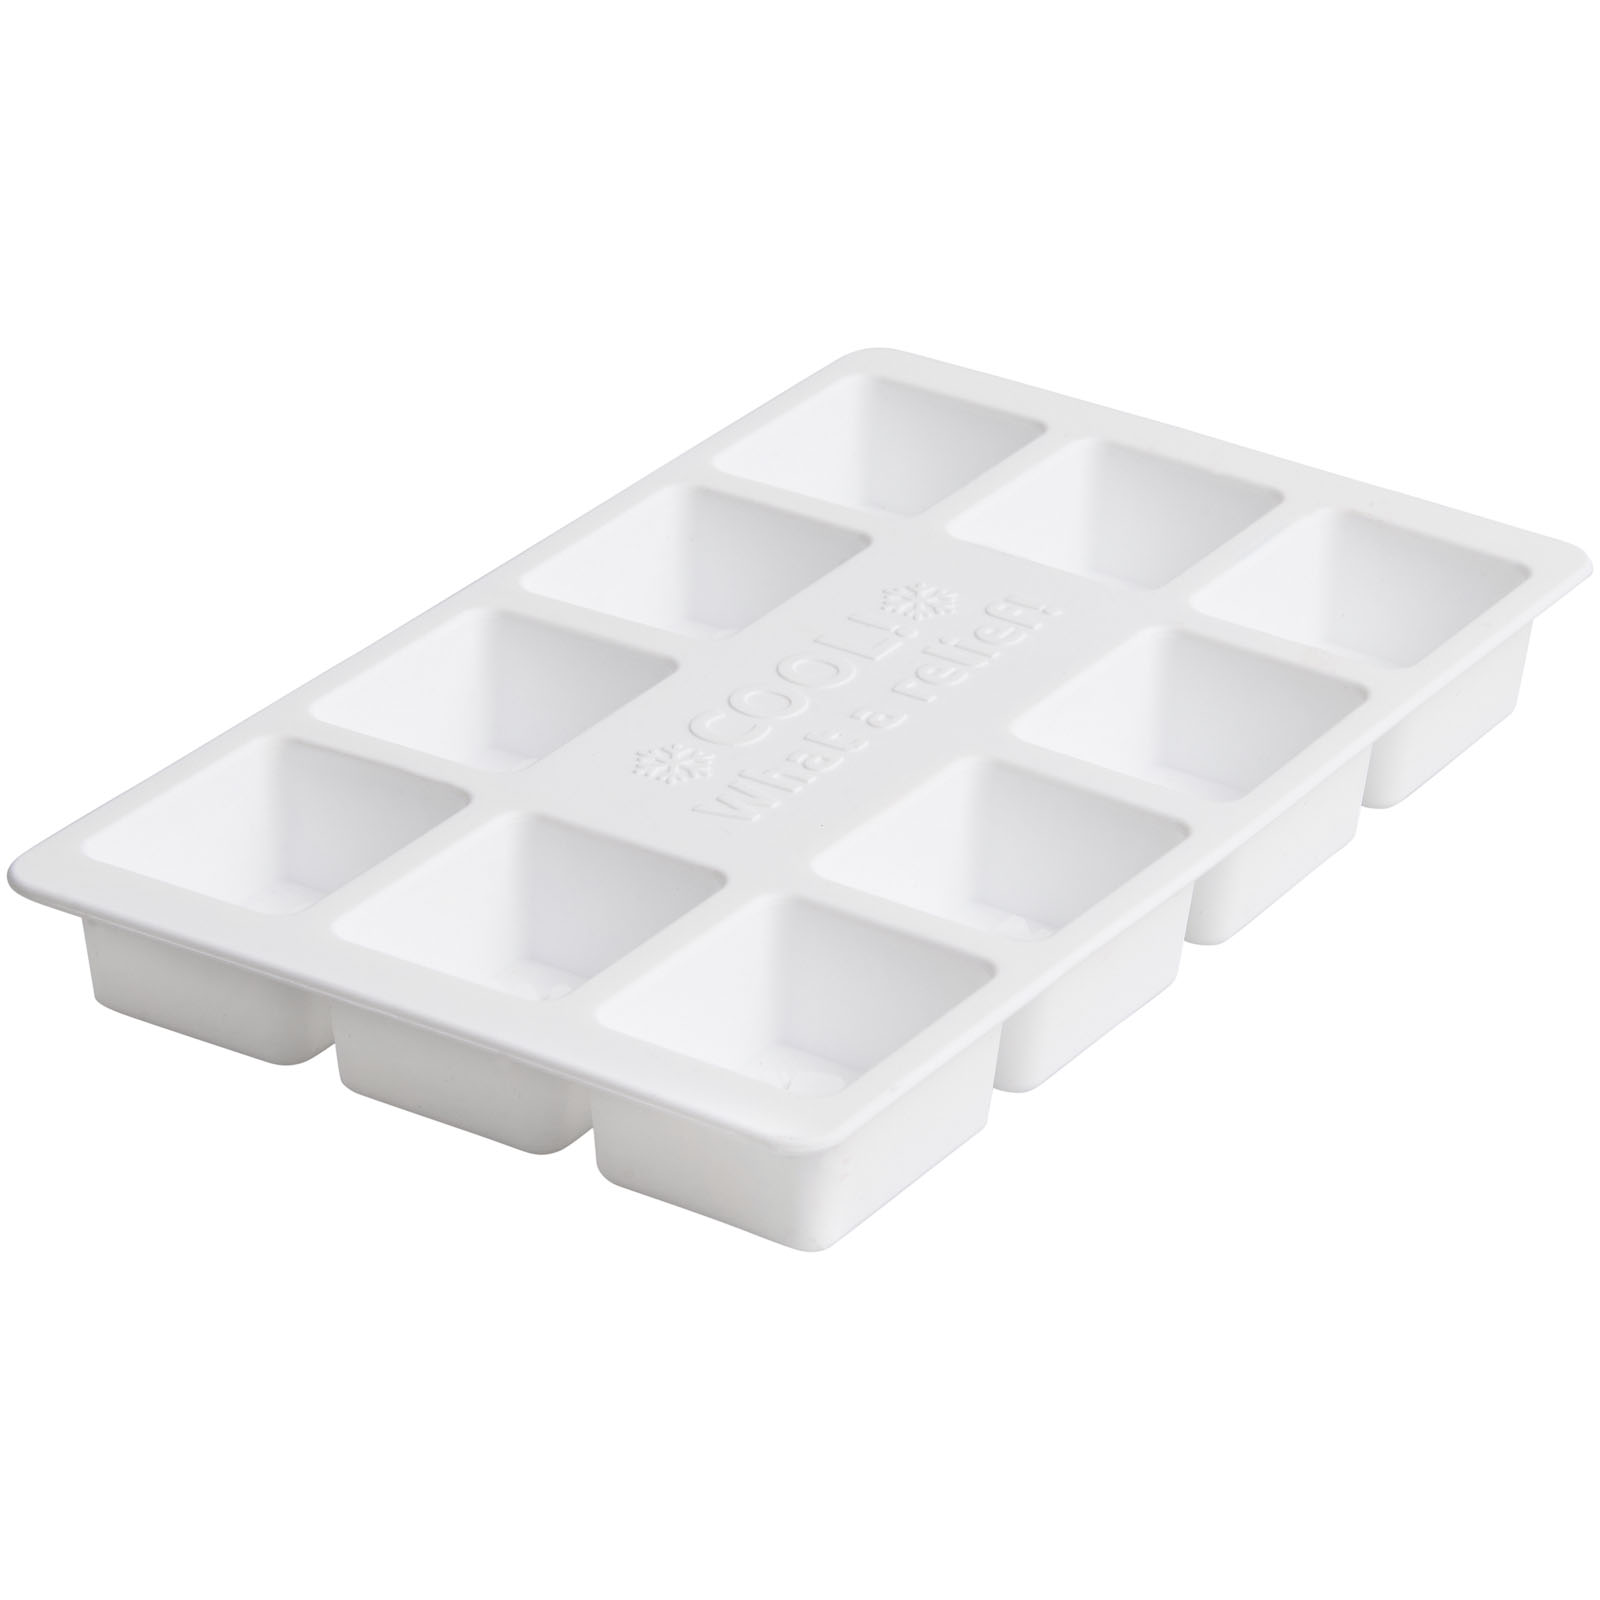 Advertising Kitchenware - Chill customisable ice cube tray - 0